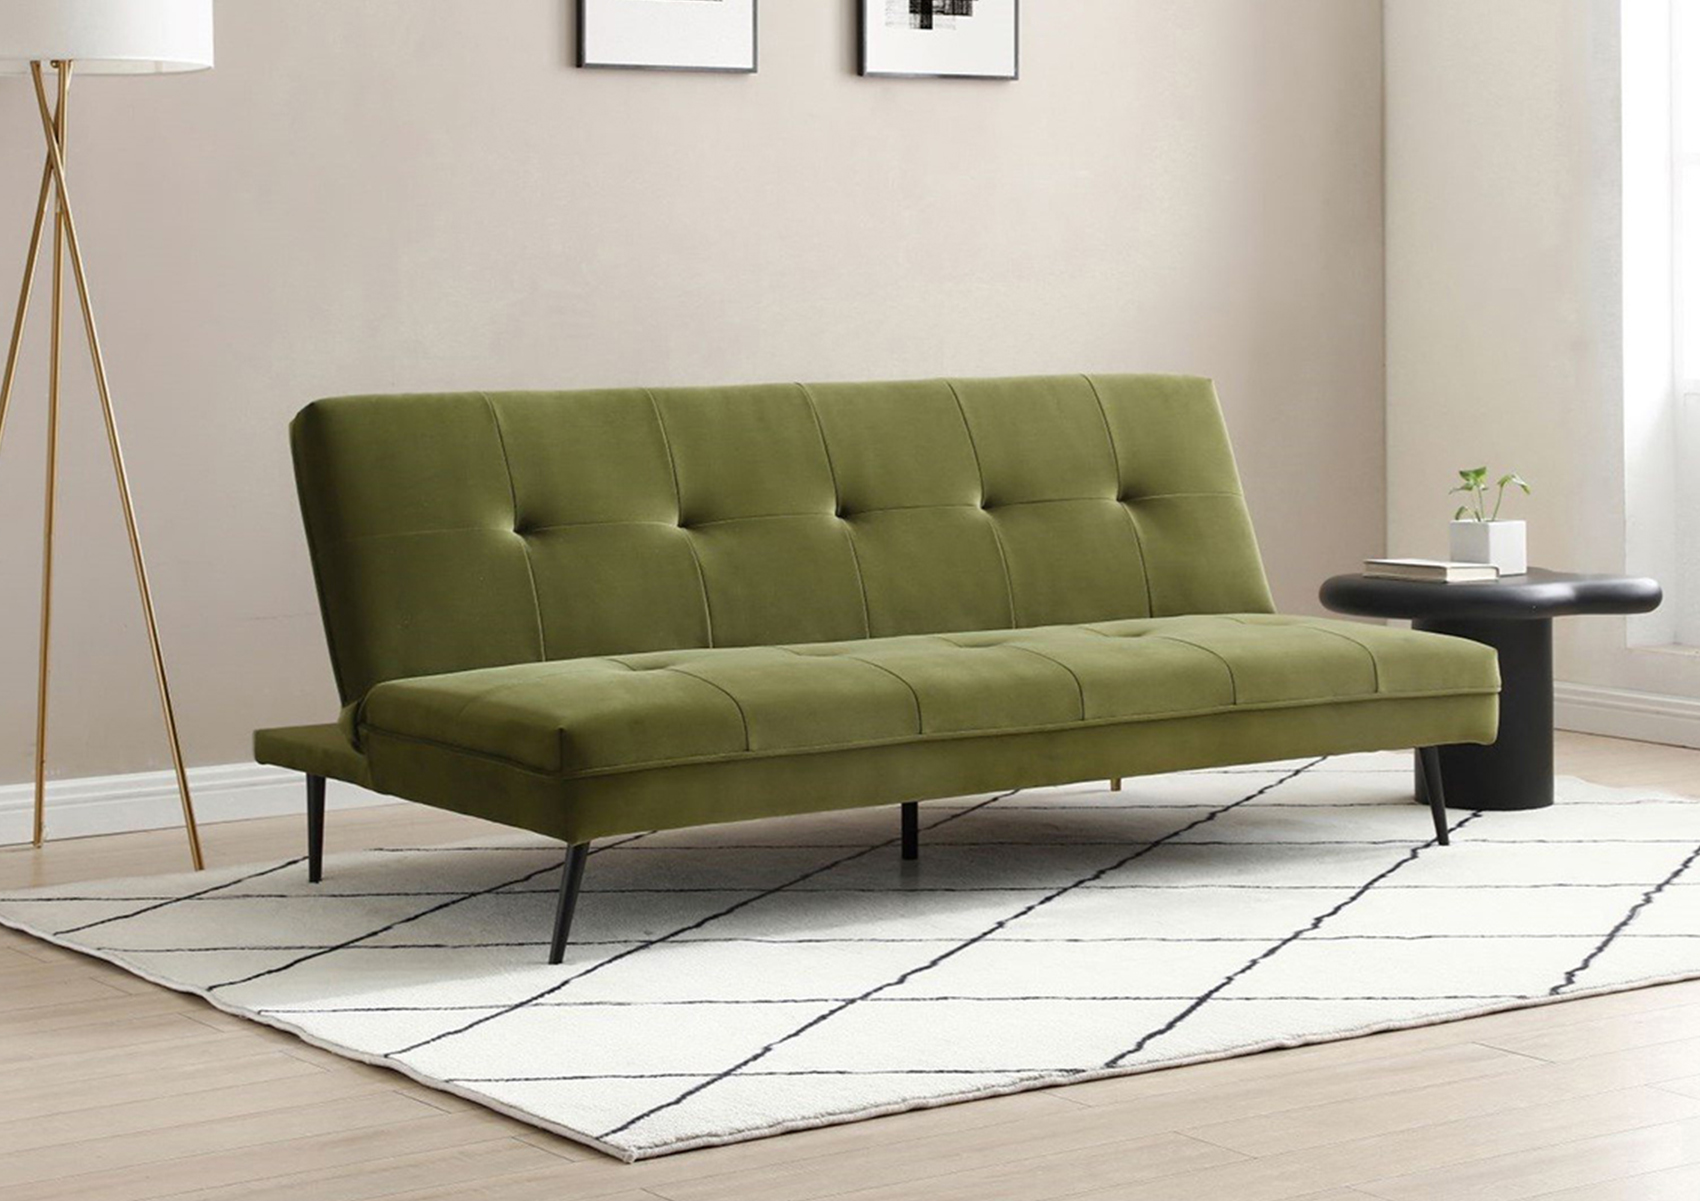 View Bassett Olive Green Sofa Bed Time4Sleep information